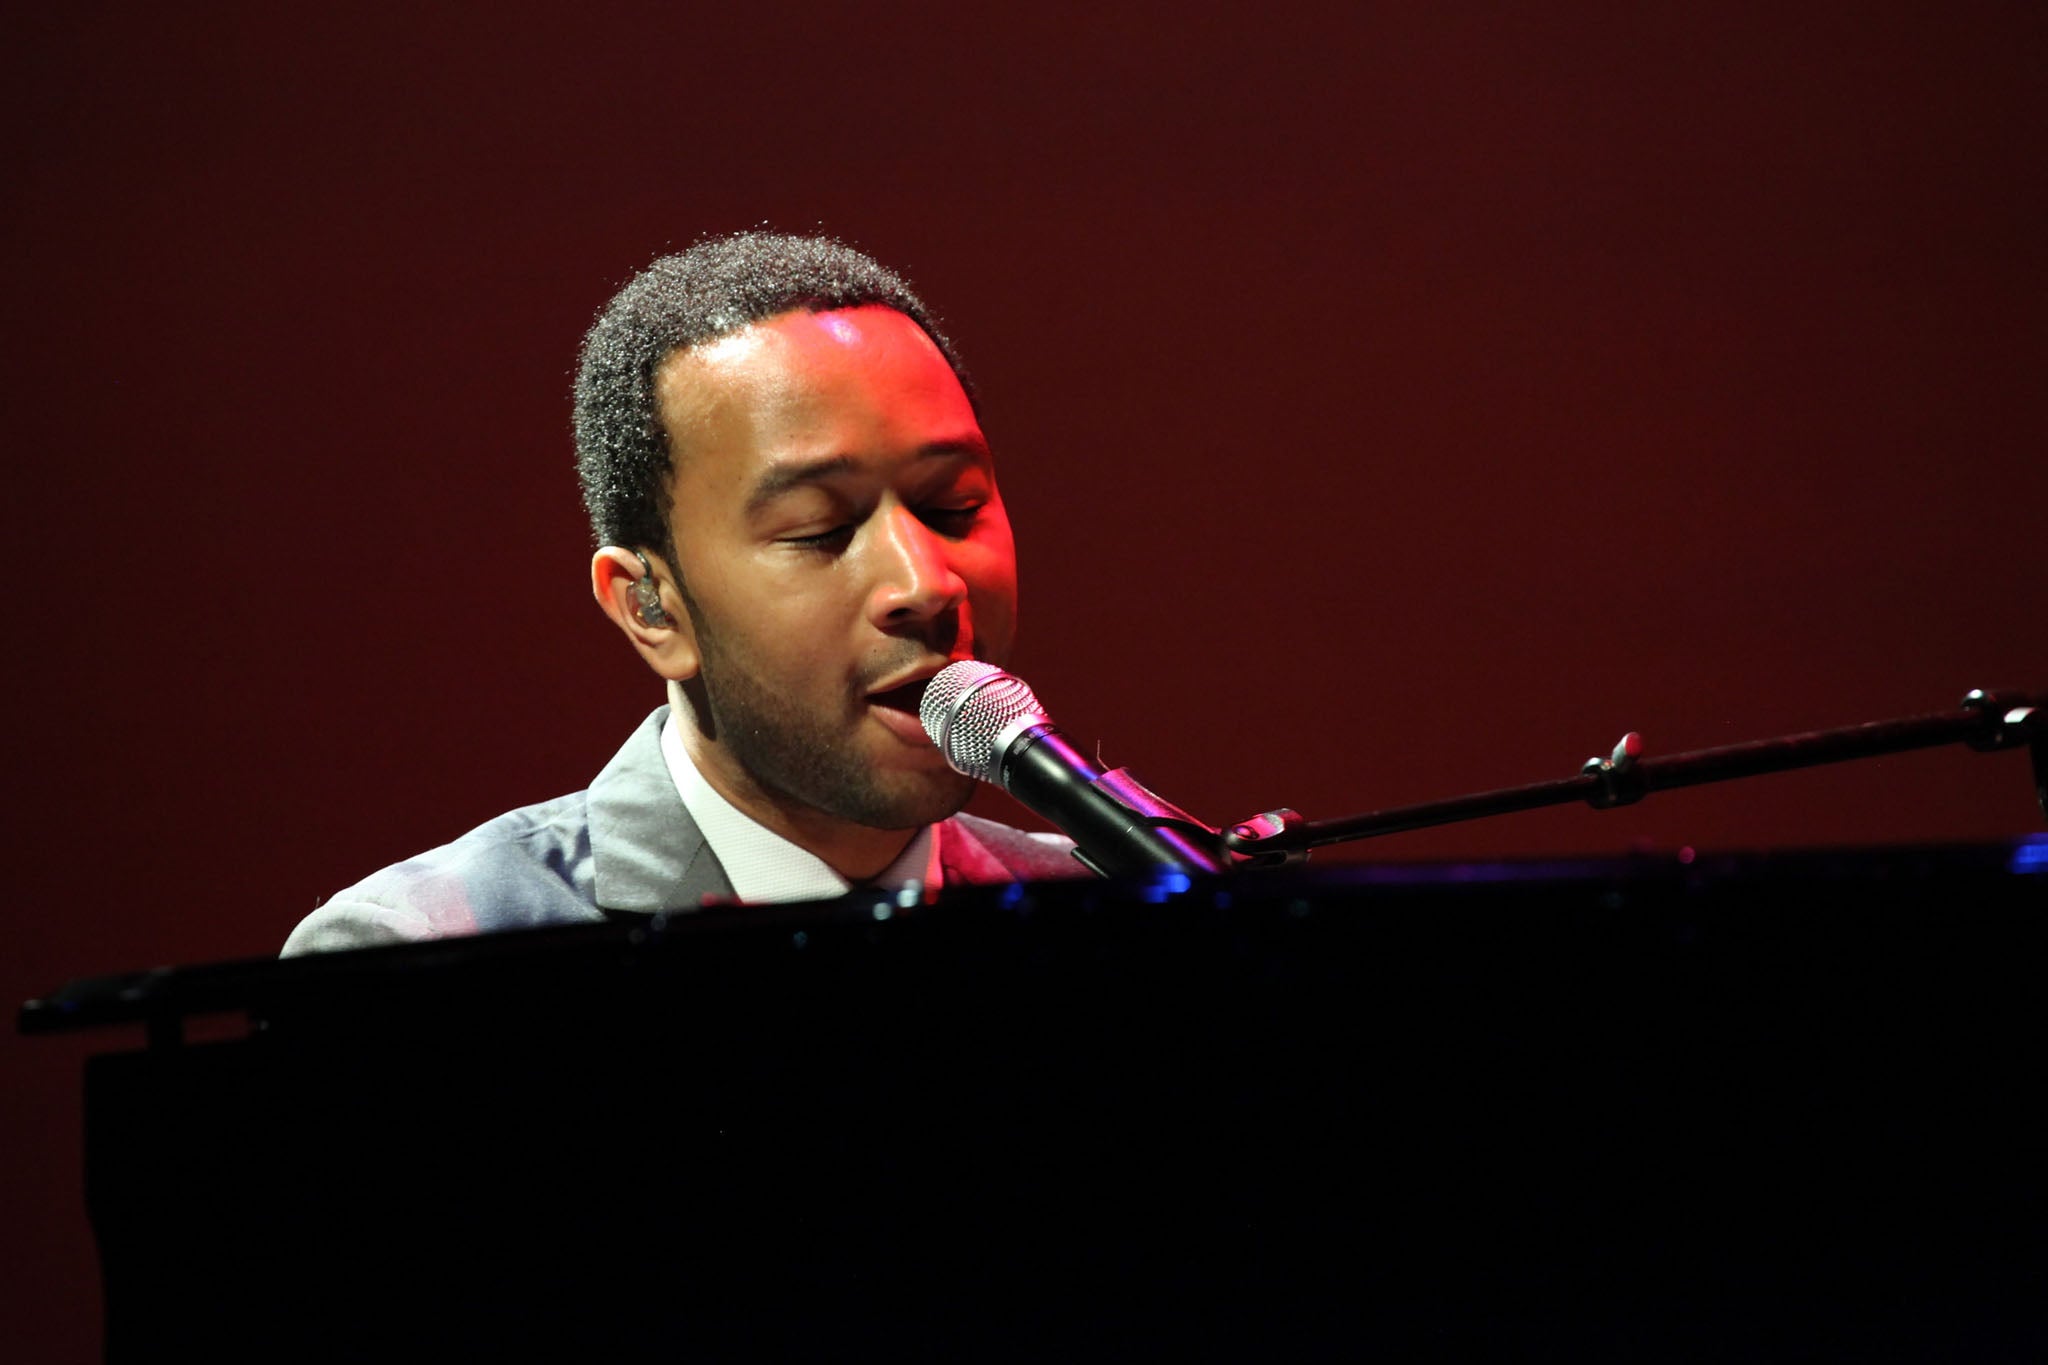 John Legend's Bahrain performance comes after he spoke out for human rights at the Oscars